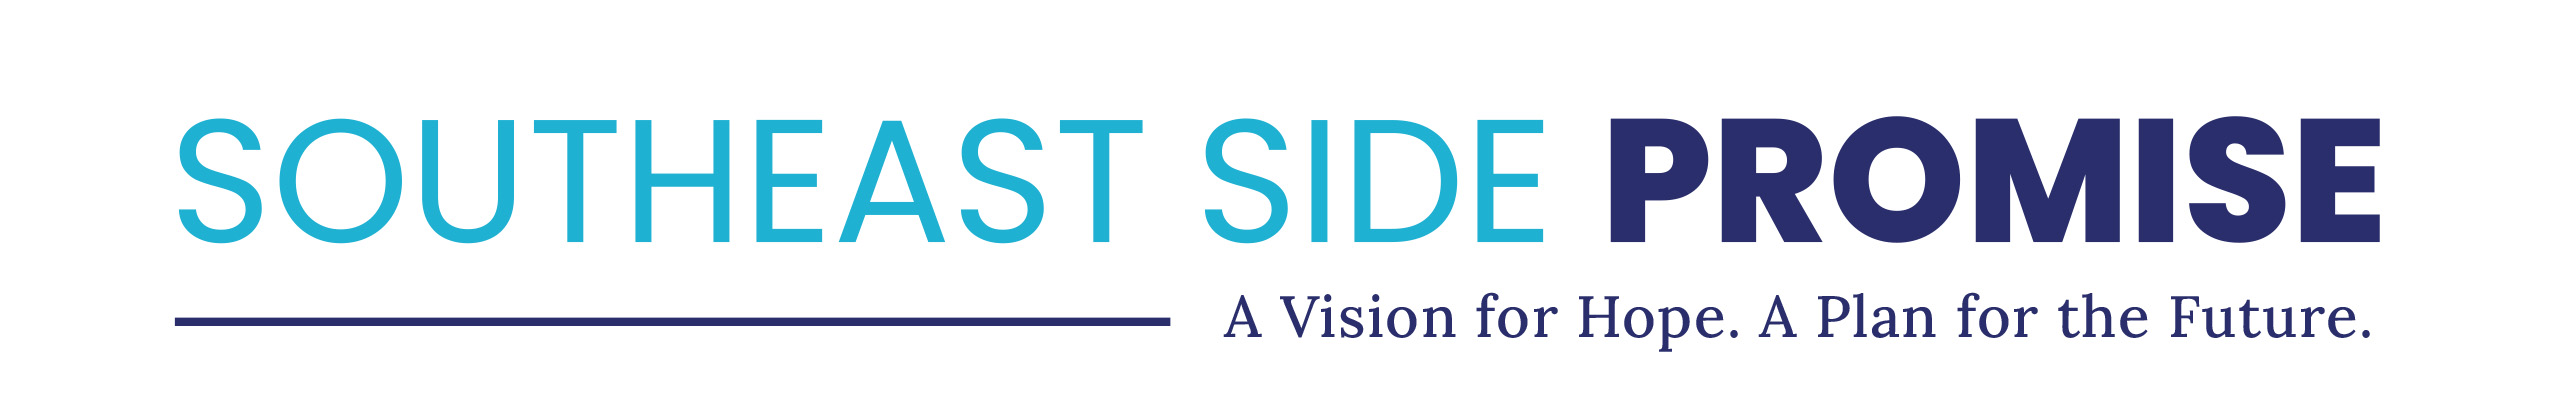 Southeast Side Promise. A Vision for Hope. A Plan for the Future.